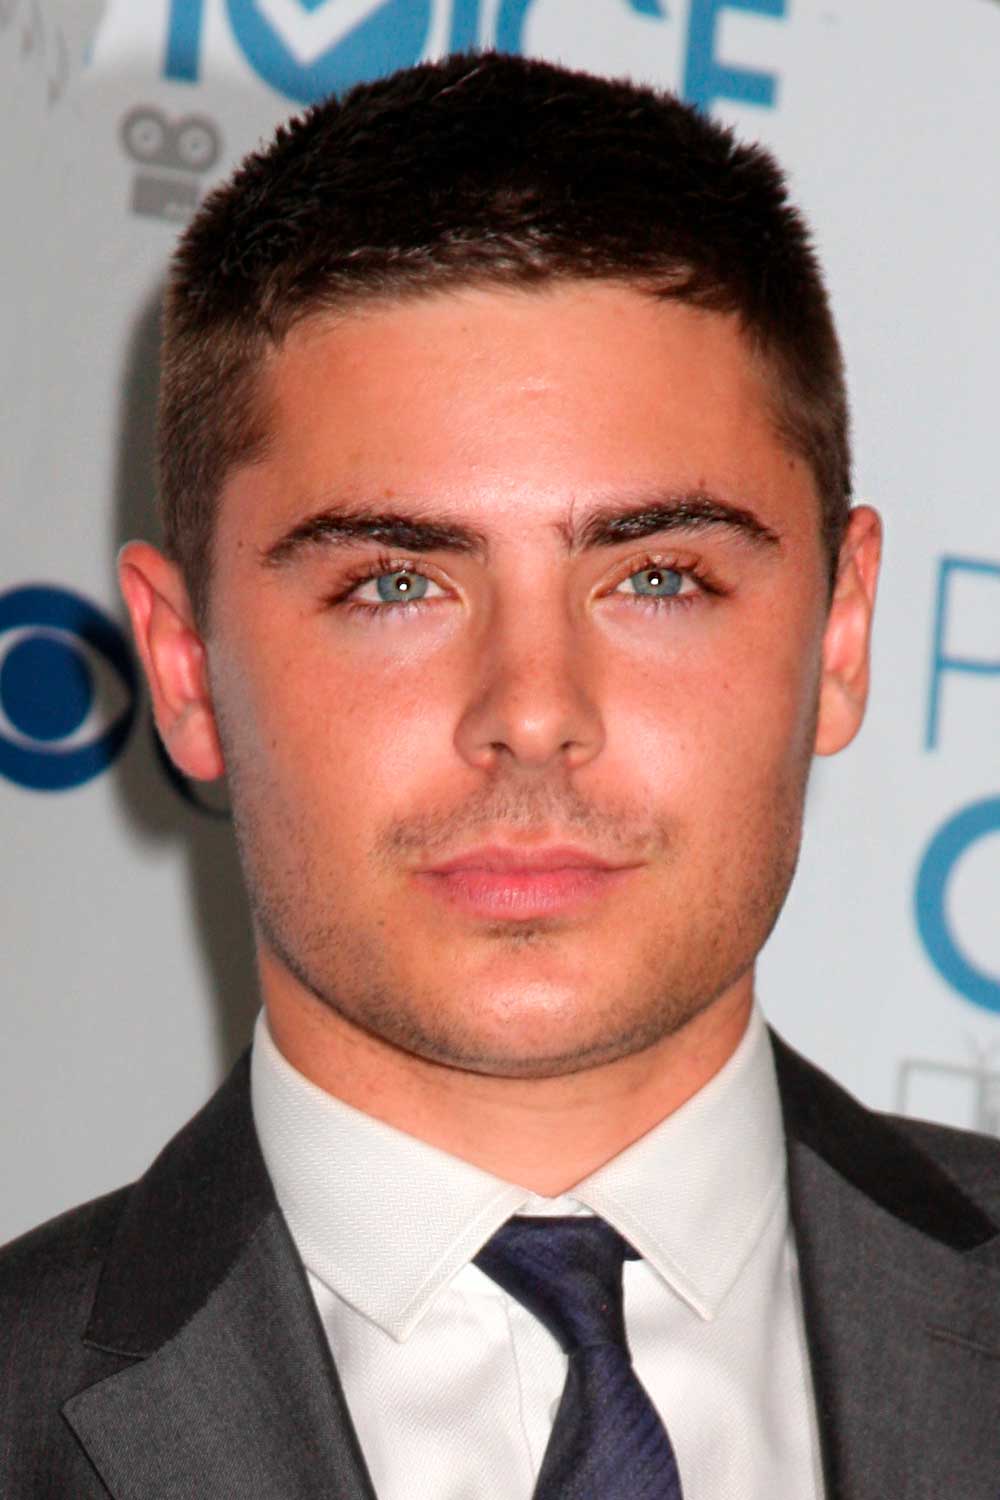 Number 6 Haircut Zac Efron #haircutnumbers #hairclippersizes